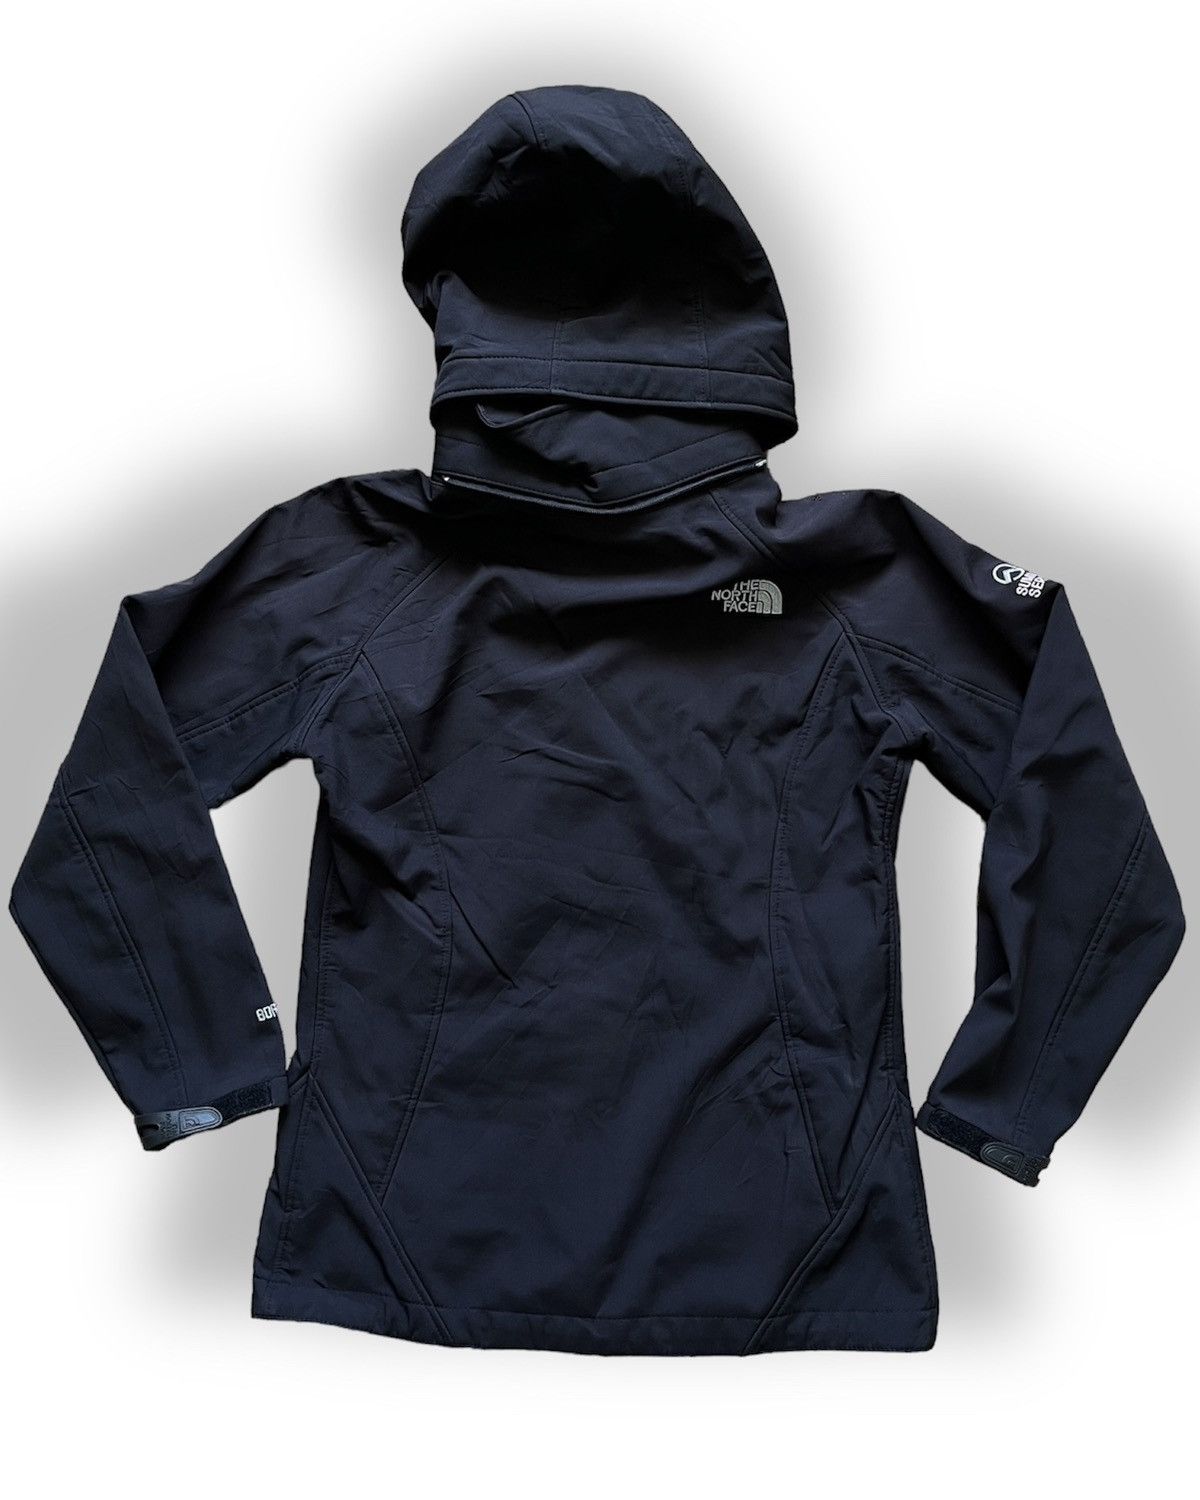 Outdoor Style Go Out! - The North Face X Goretex Summit Series Jacket - 2